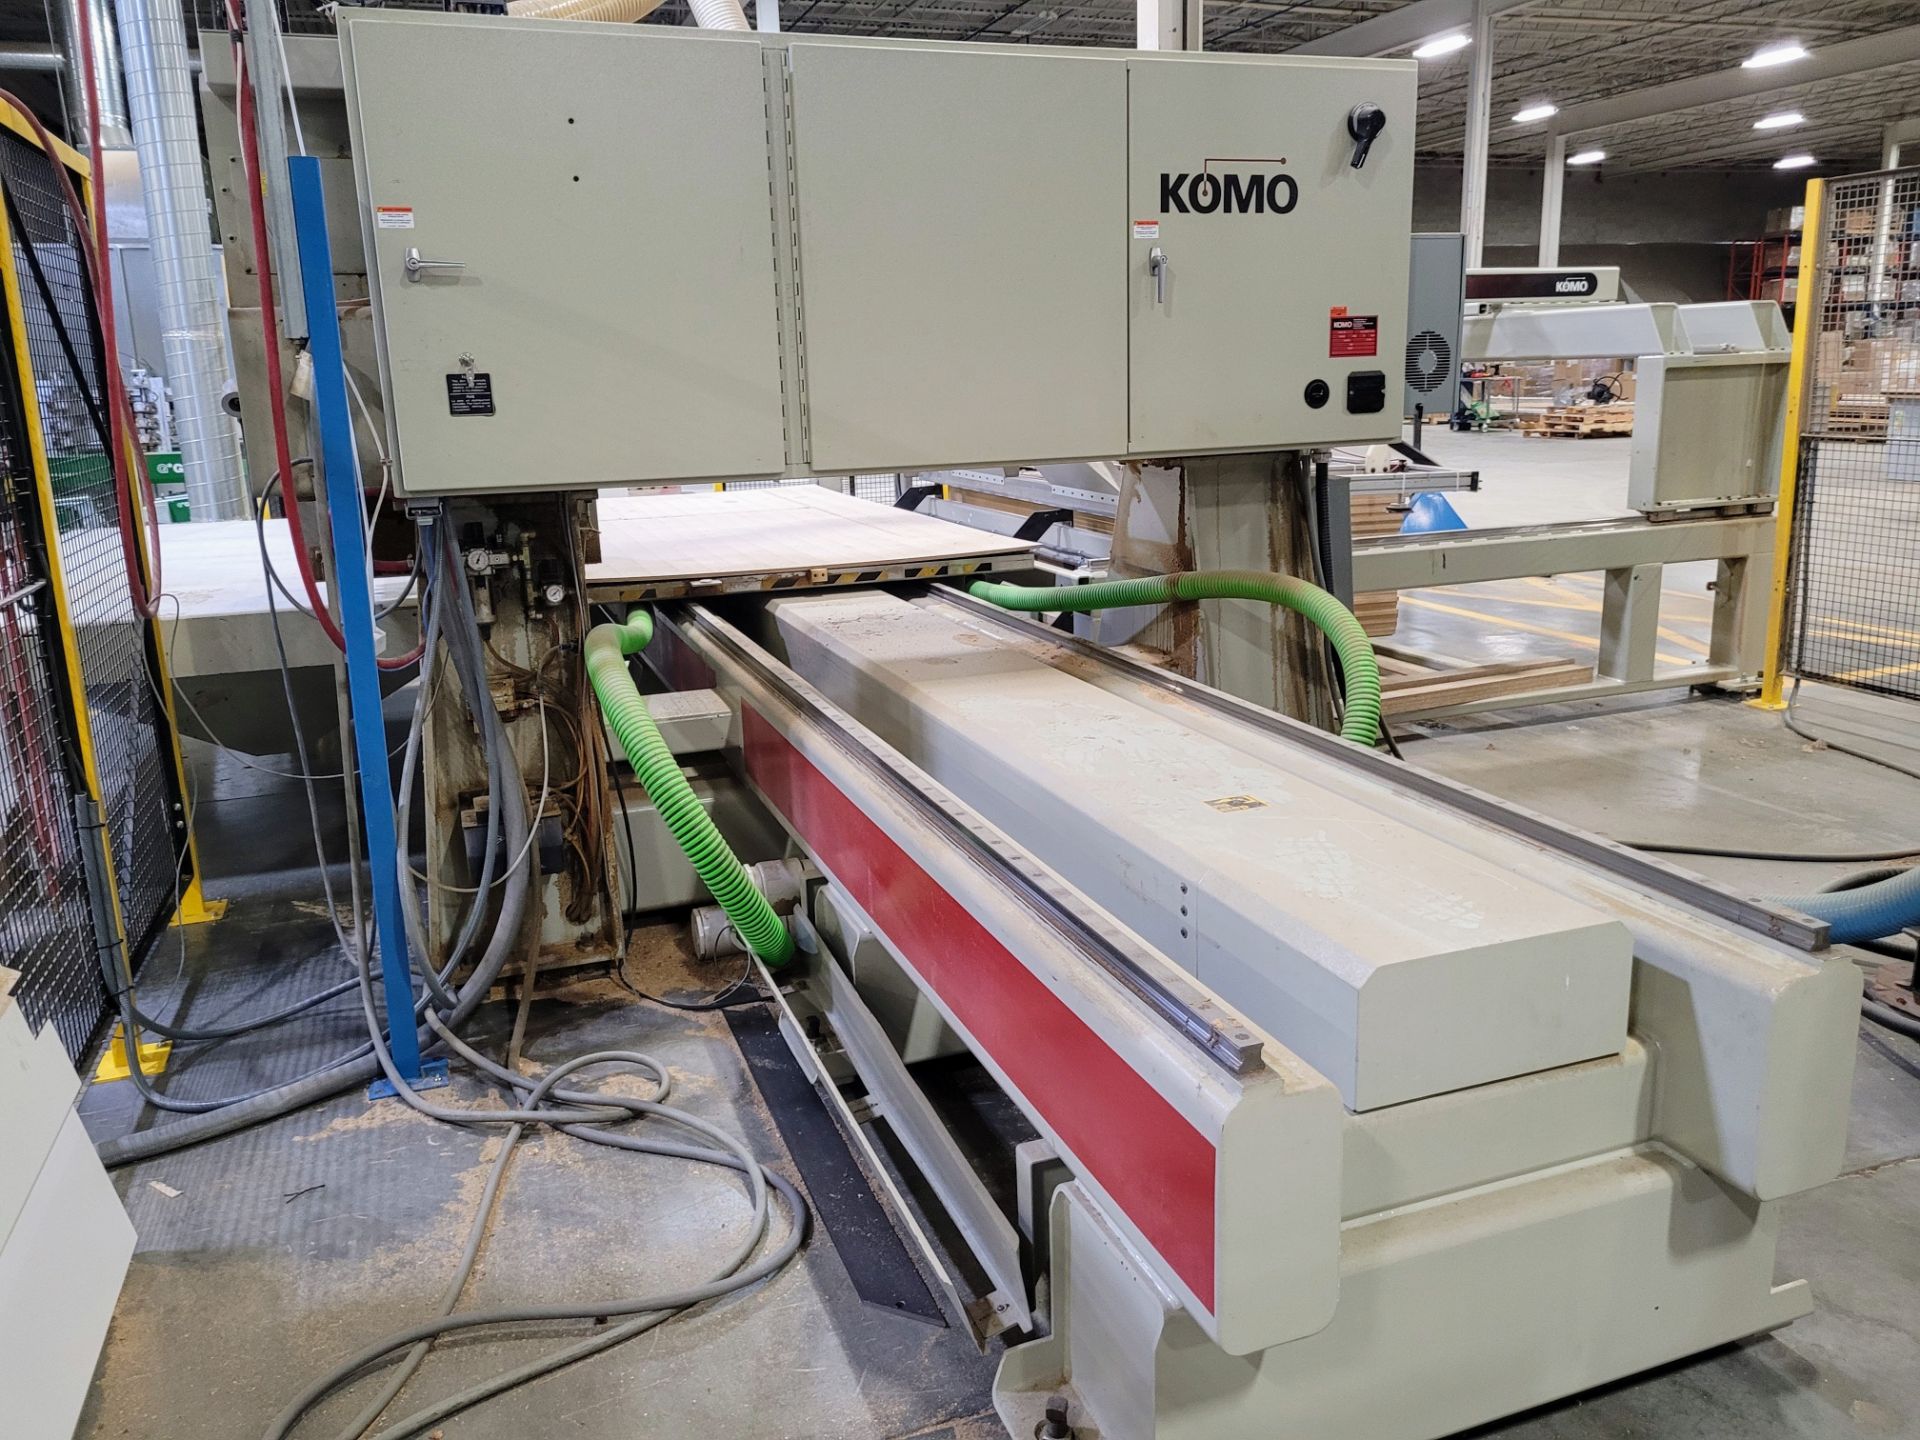 2006 KOMO VR510 MACHI II CNC ROUTER, 60" X 120" VACUUM TABLE, 16HP ATC VARIABLE SPEED SPINDLE, 10- - Image 4 of 12